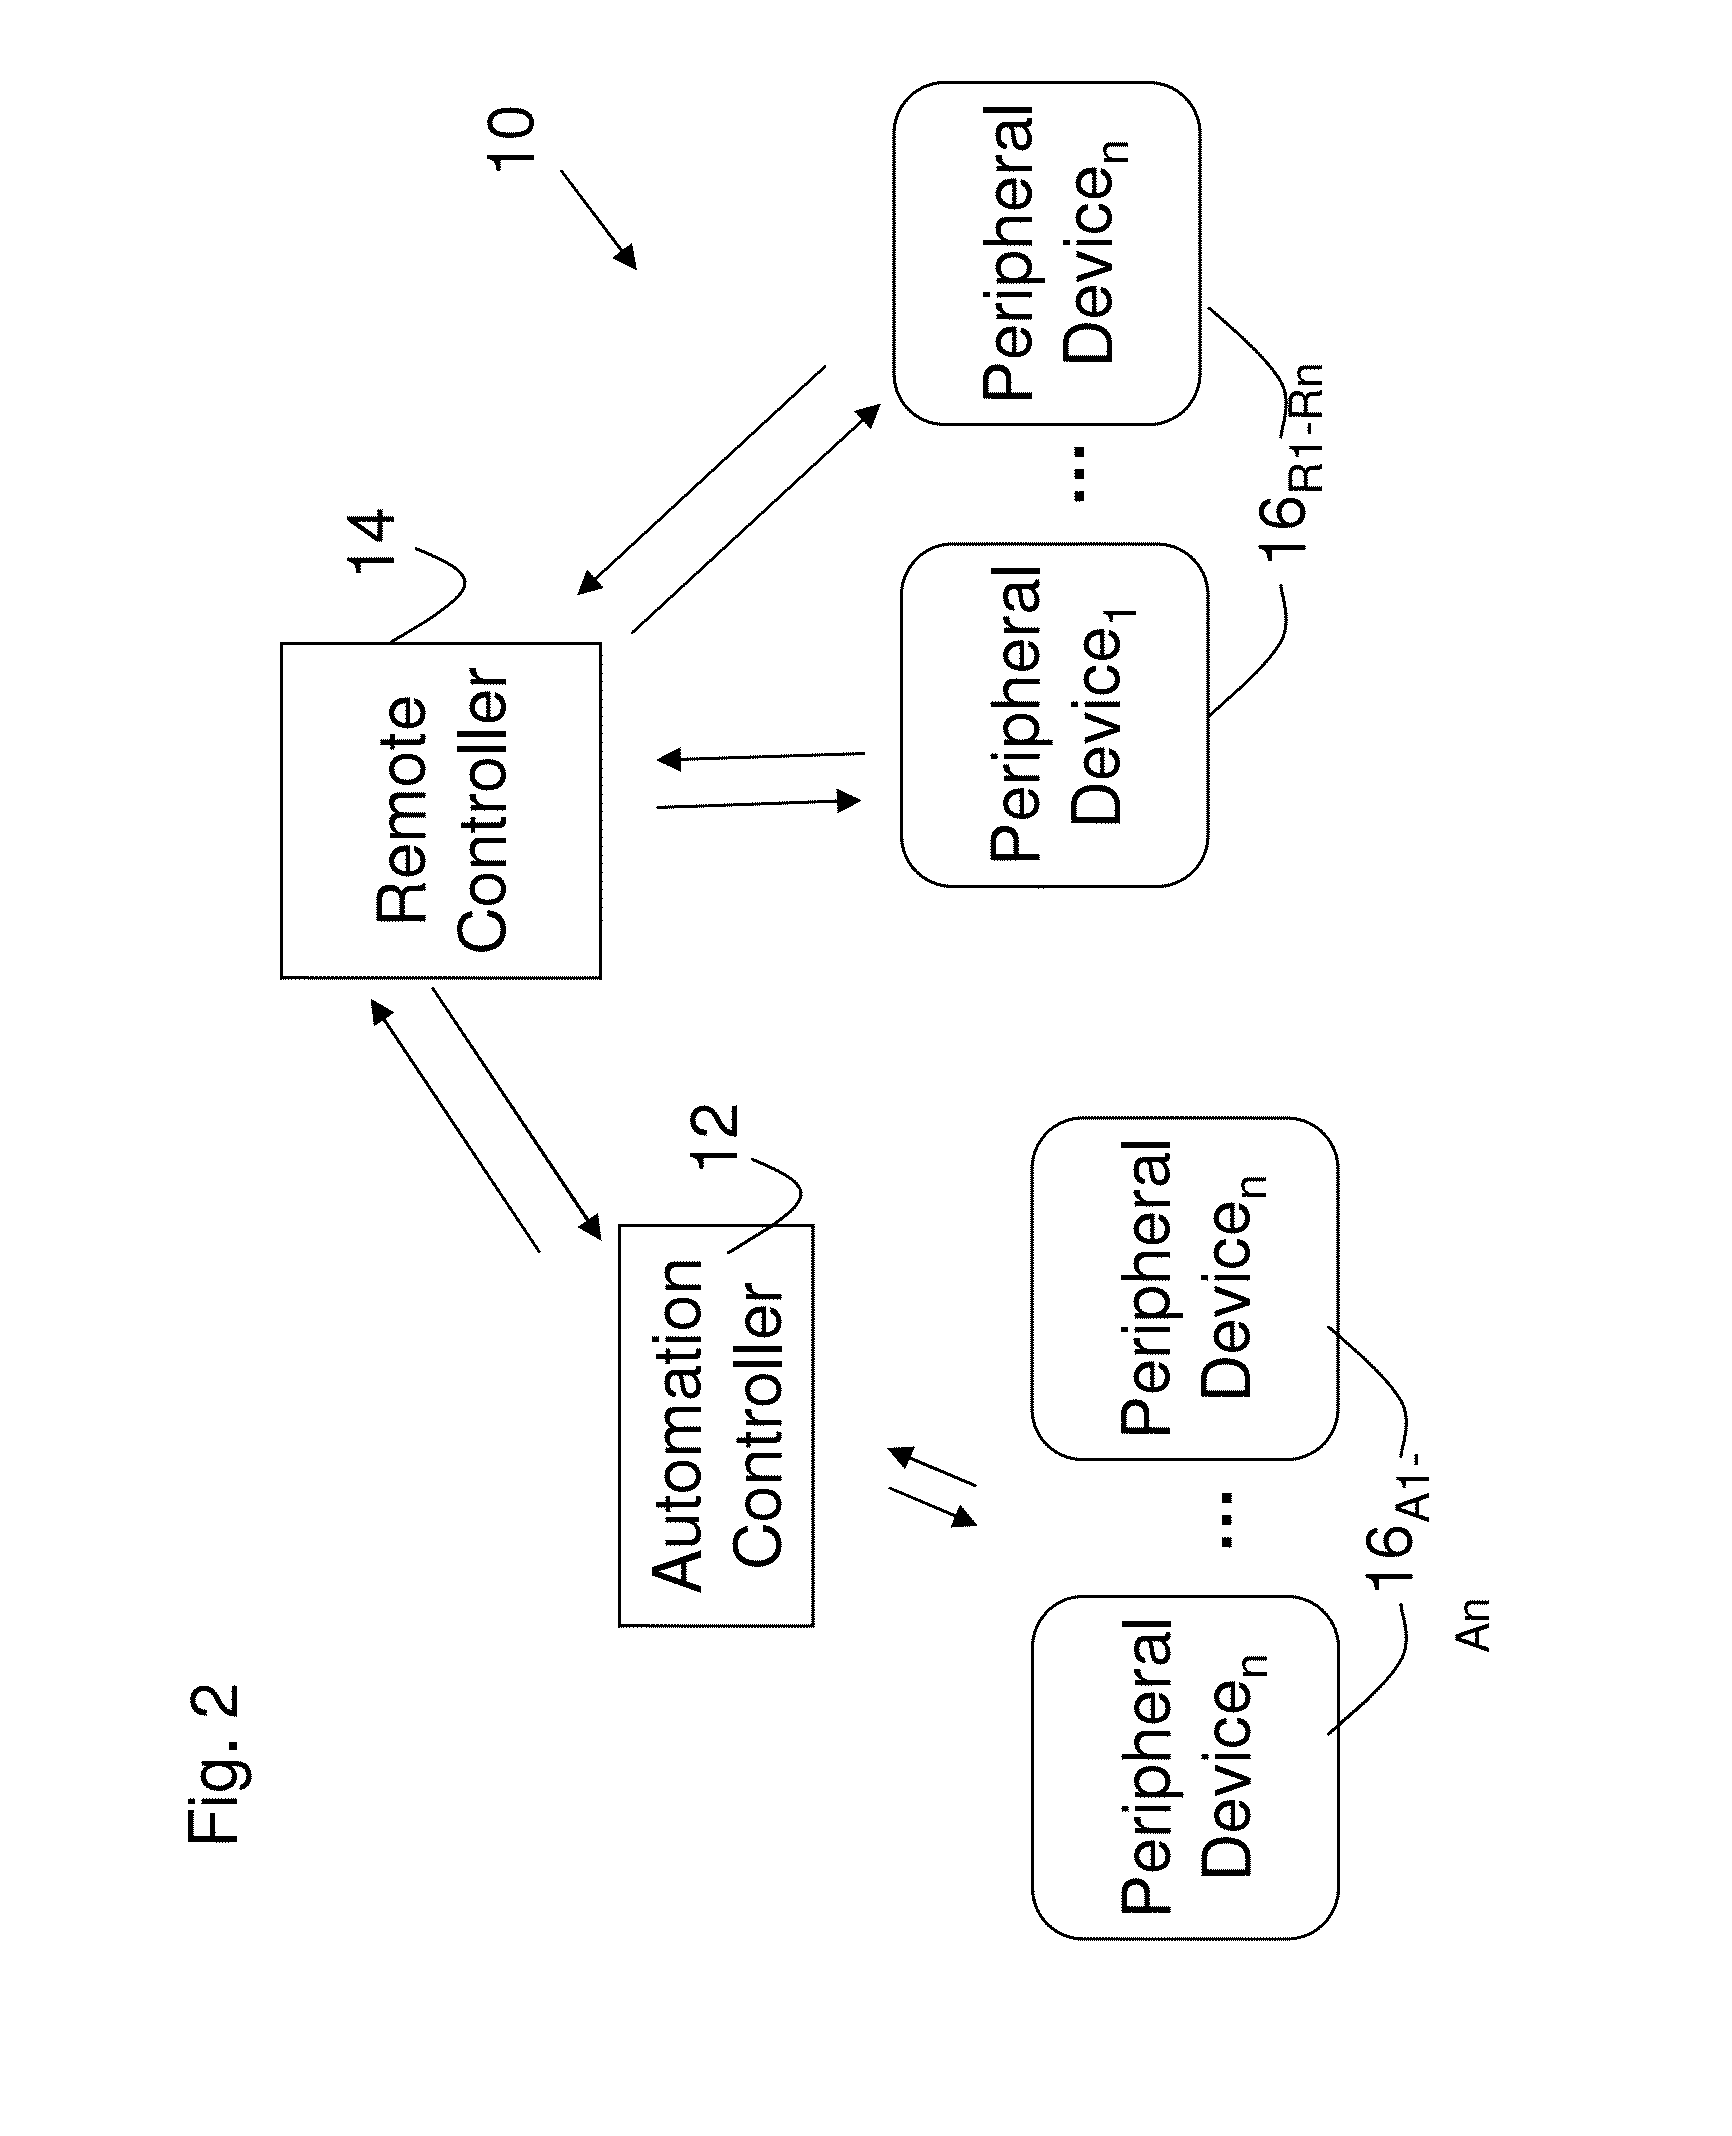 Automation system network management, architectures, and methods and applications thereof